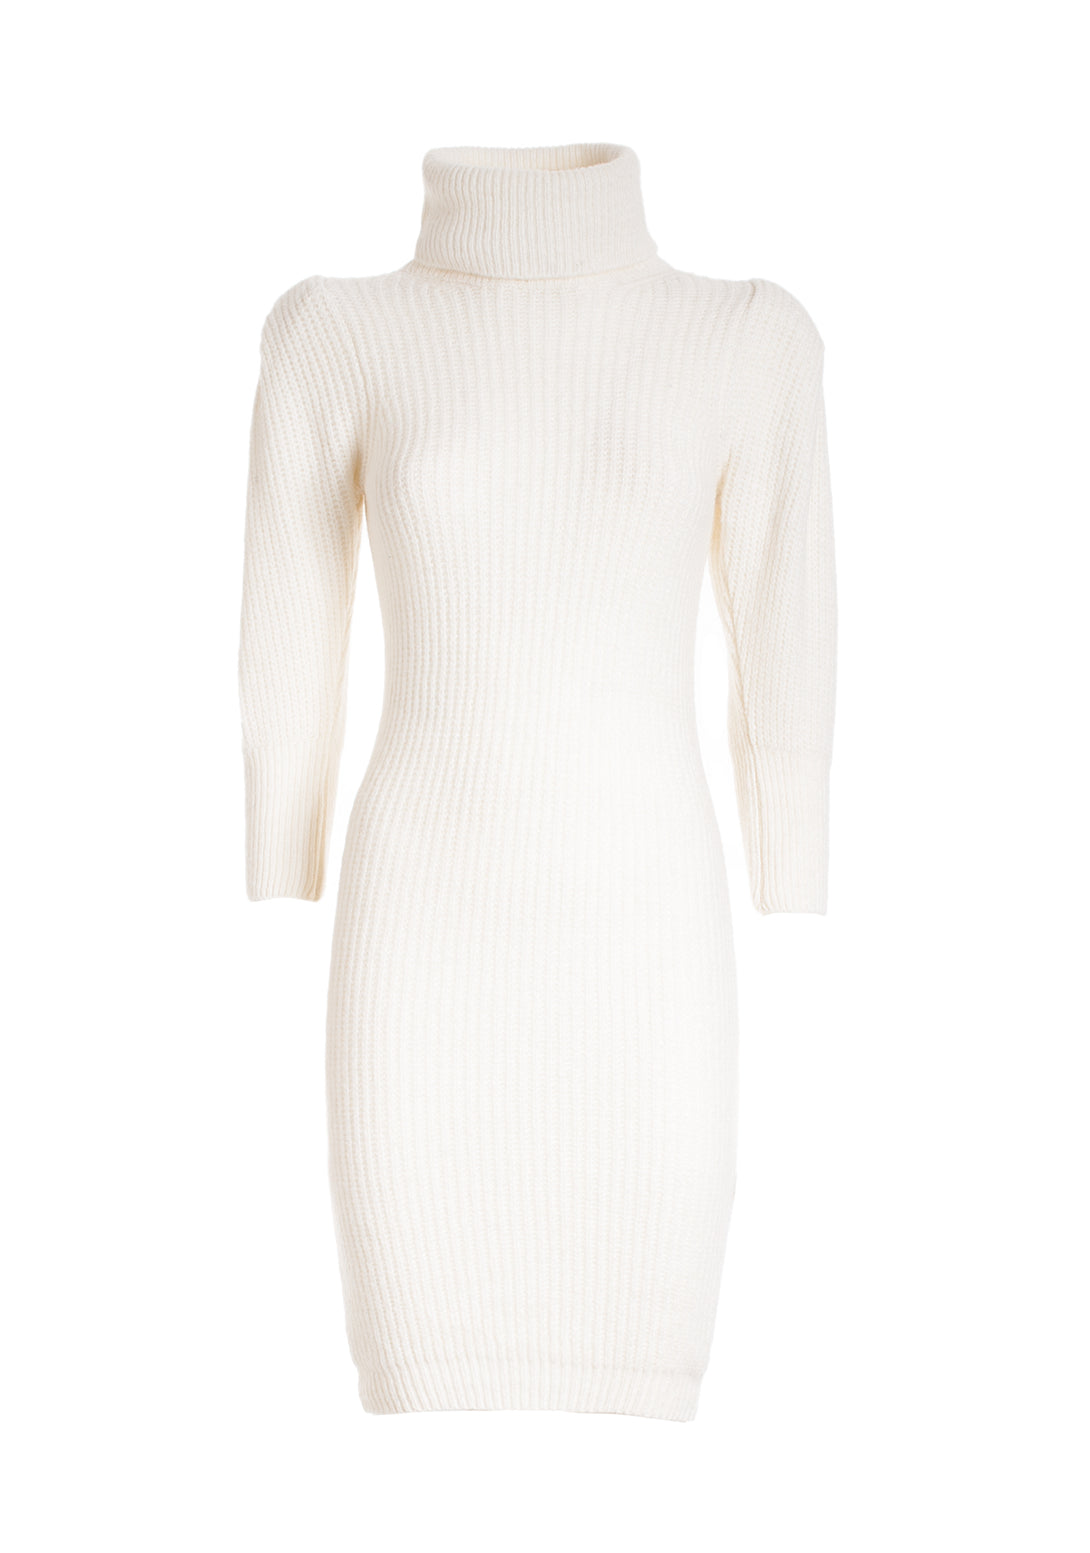 Knit dress tight fit with ribs